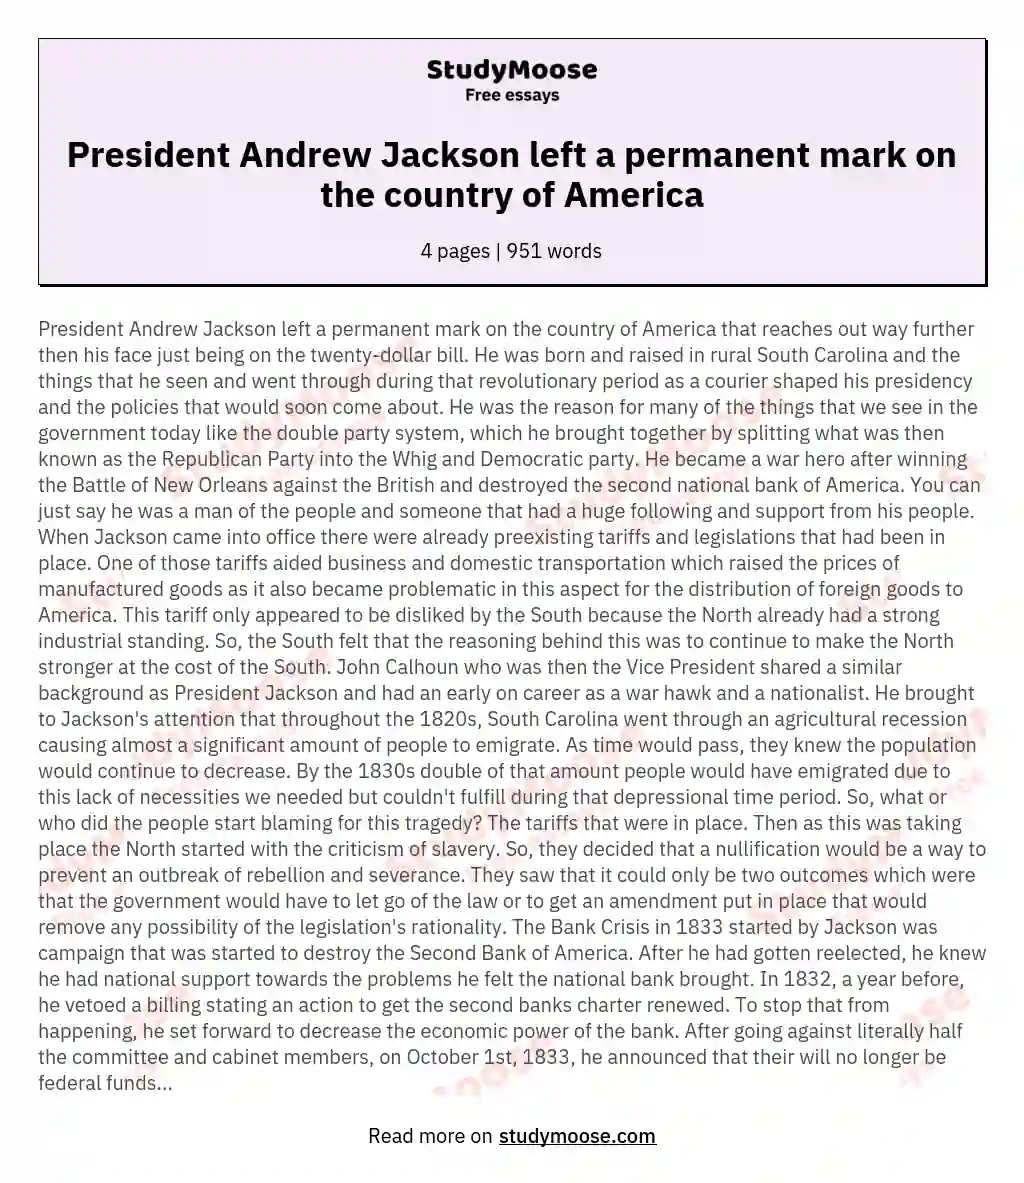 President Andrew Jackson left a permanent mark on the country of America